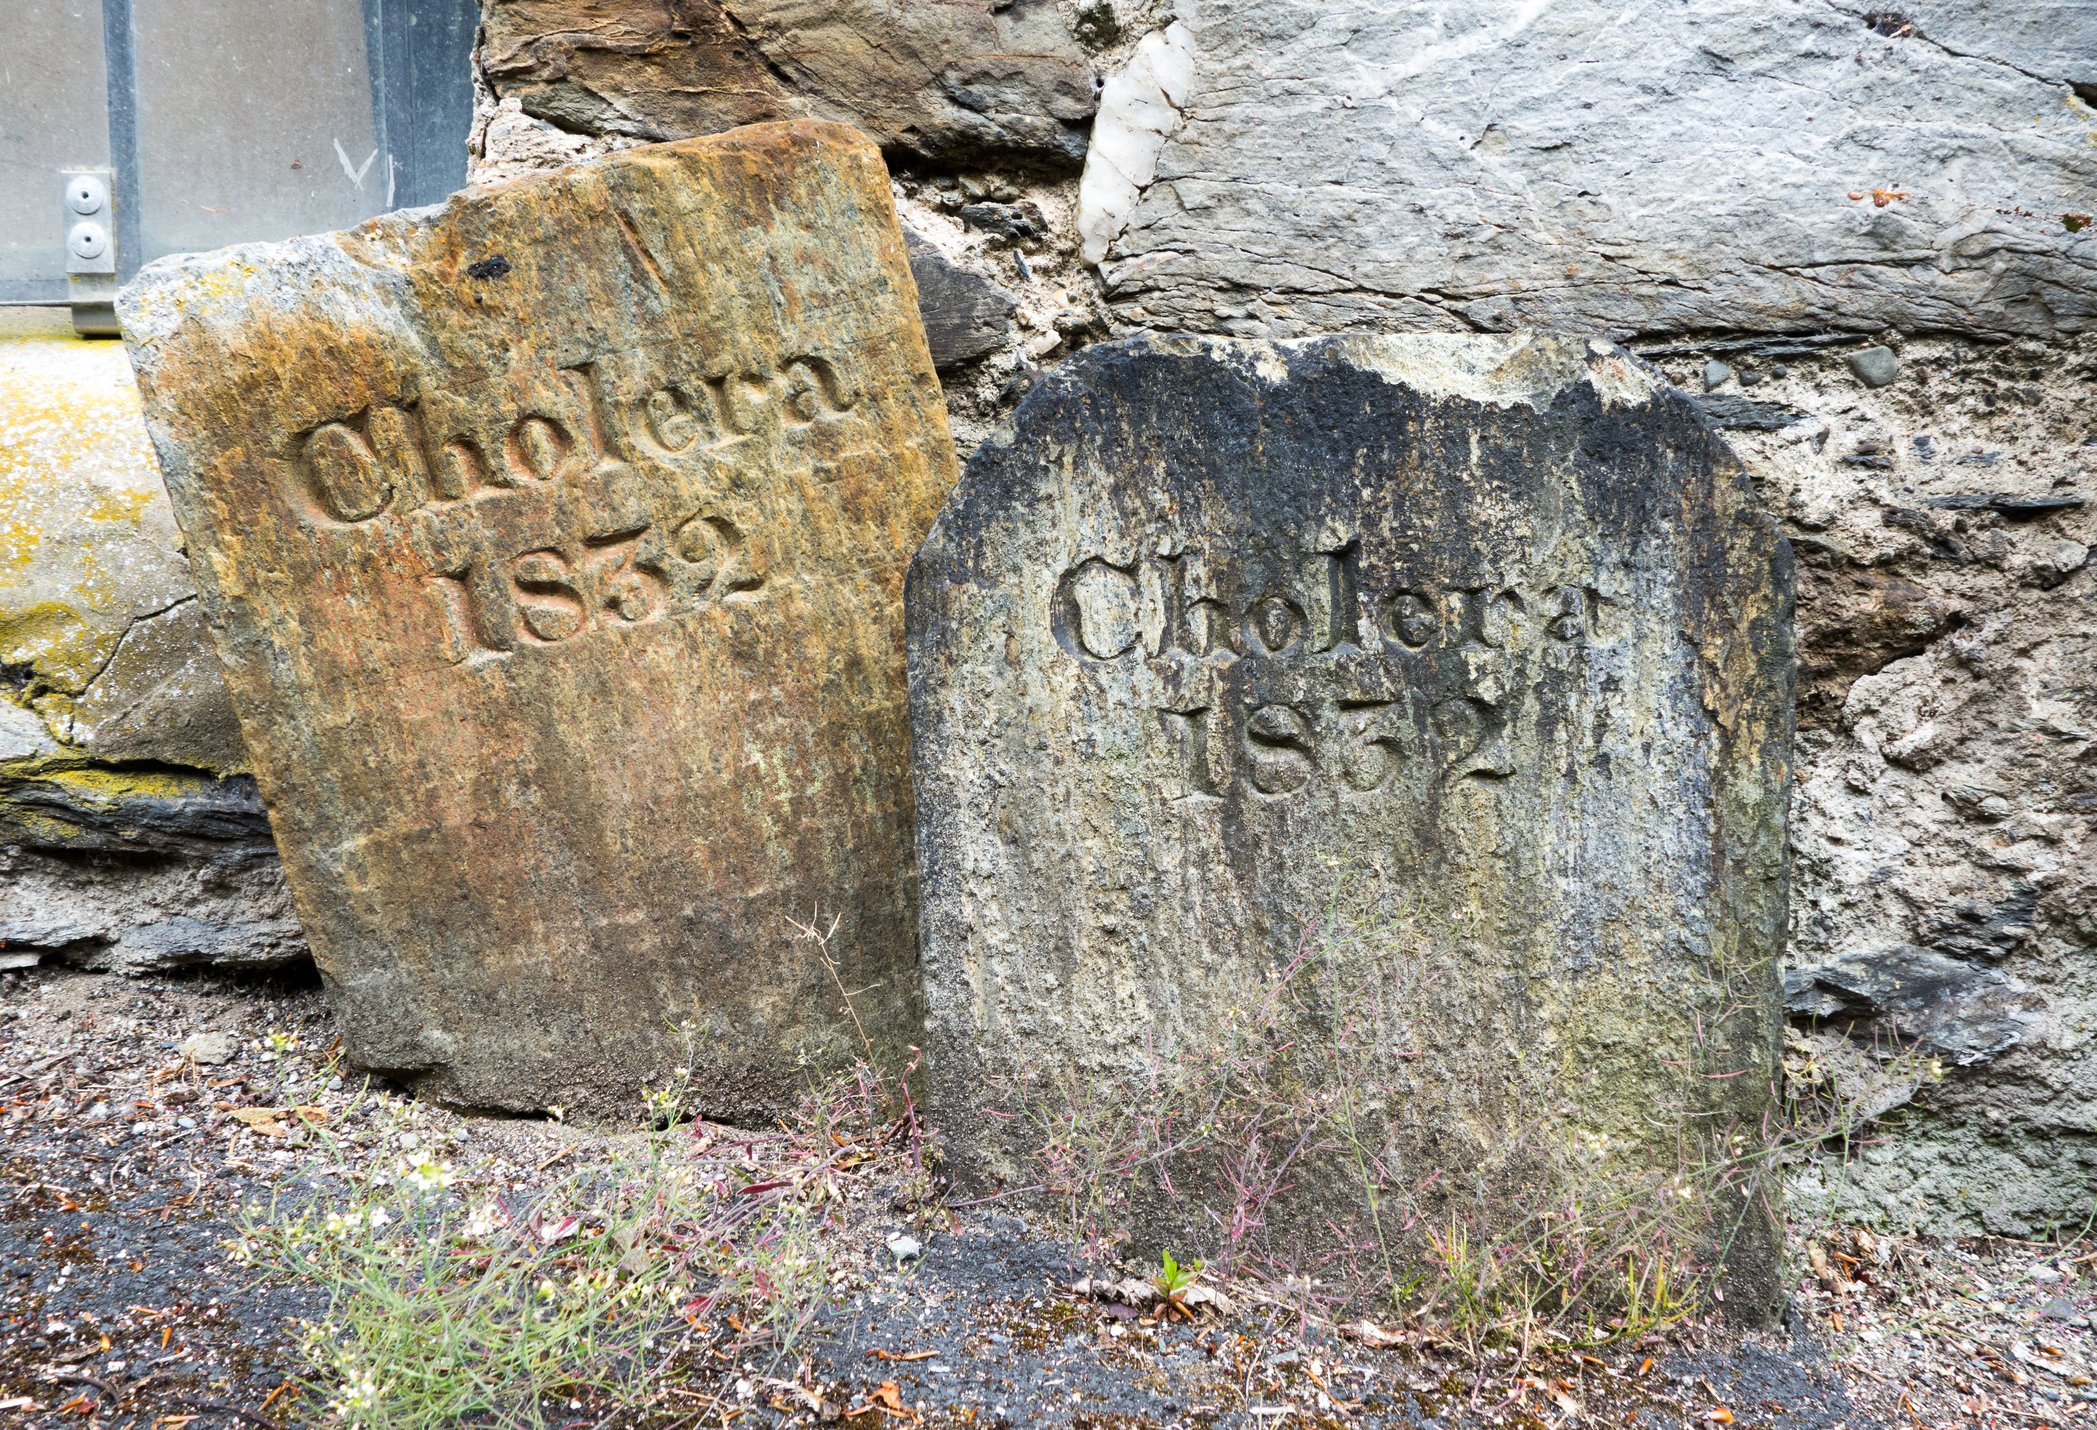 Two gravestones identifying victims of a cholera outbreak that took place on the Isle of Man in 1832. (iStock Photo)